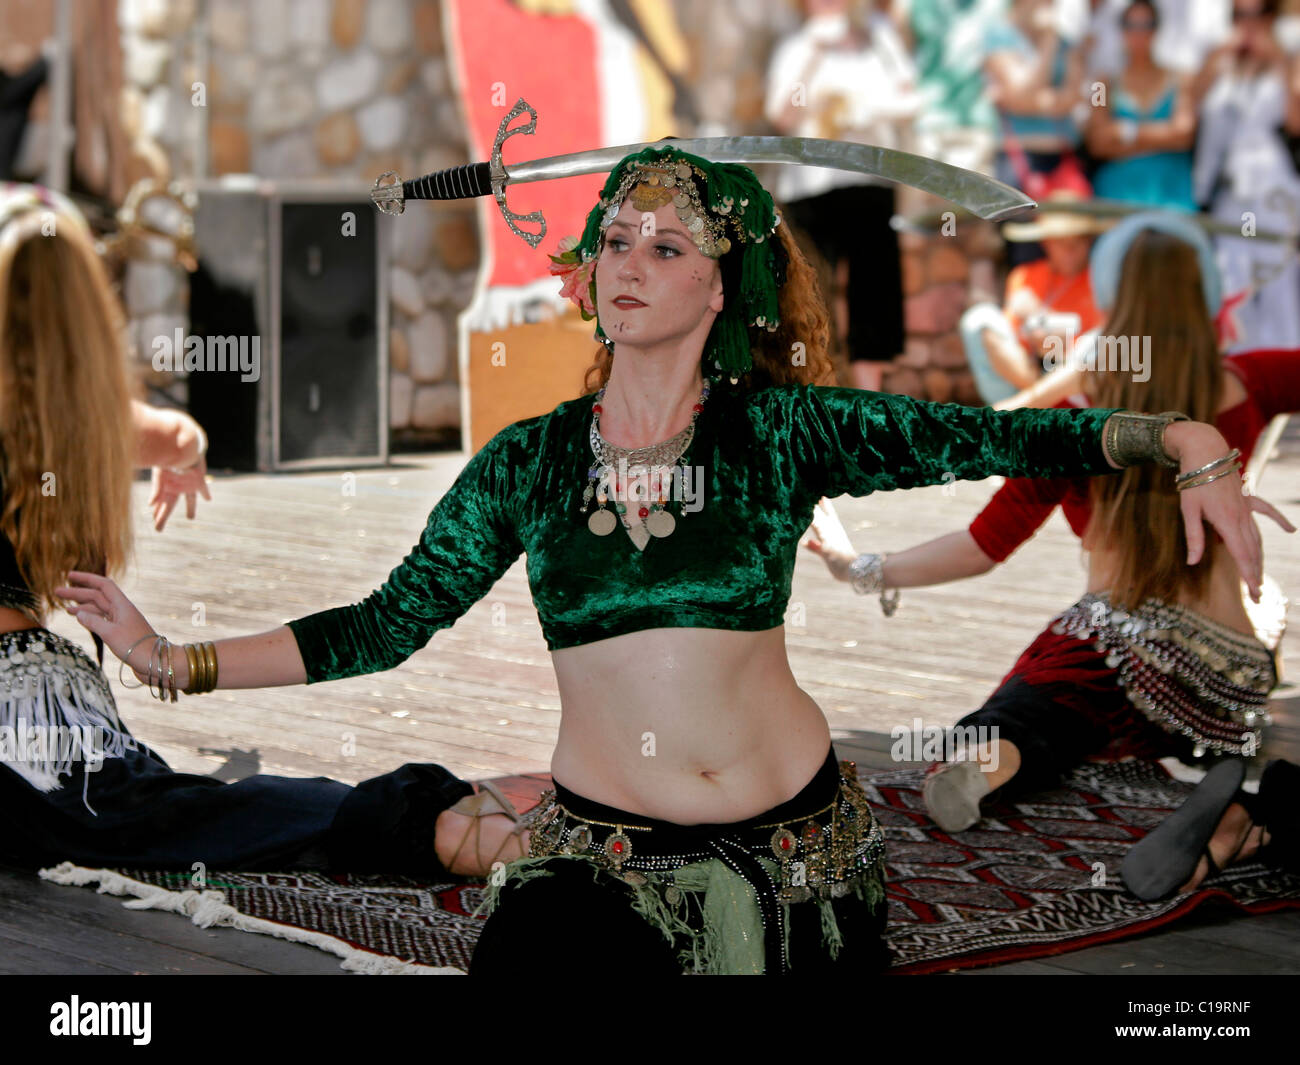 Moroccan Belly dancers performing a sword dance Stock Photo